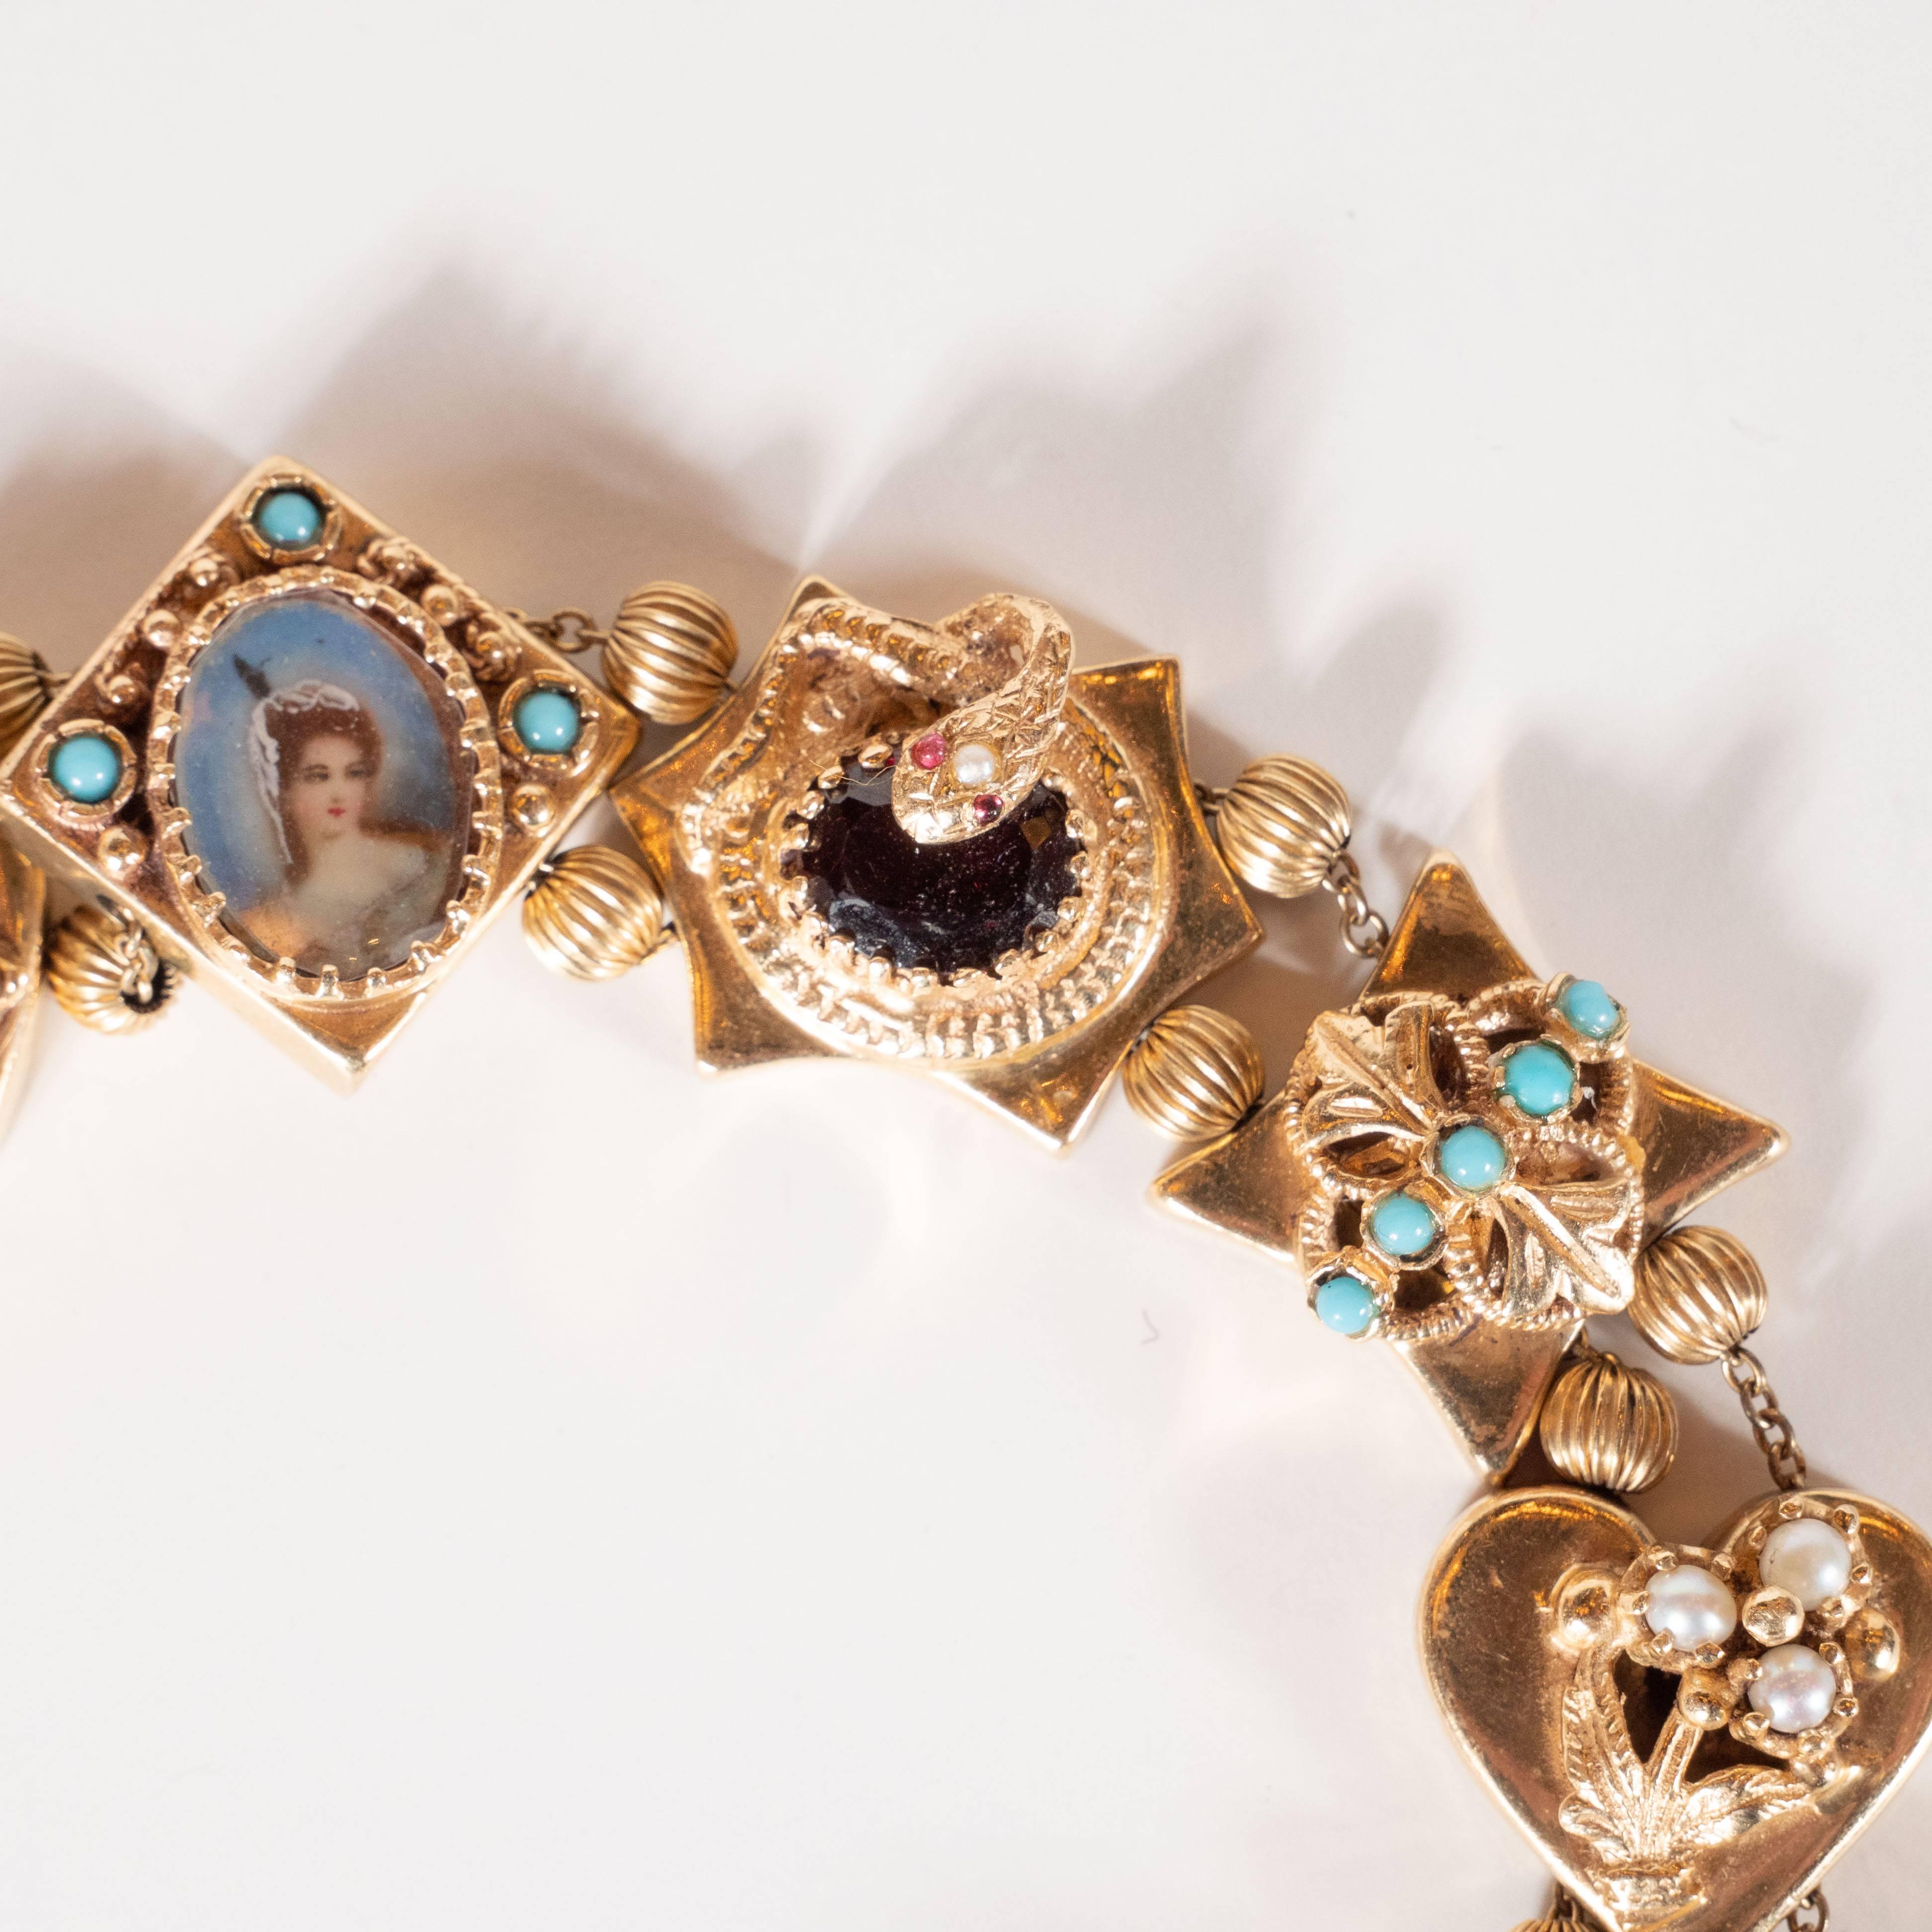 Women's 1940s Gold Slide Bracelet with Citrine, Sapphire, Rubies, Garnets and Pearls